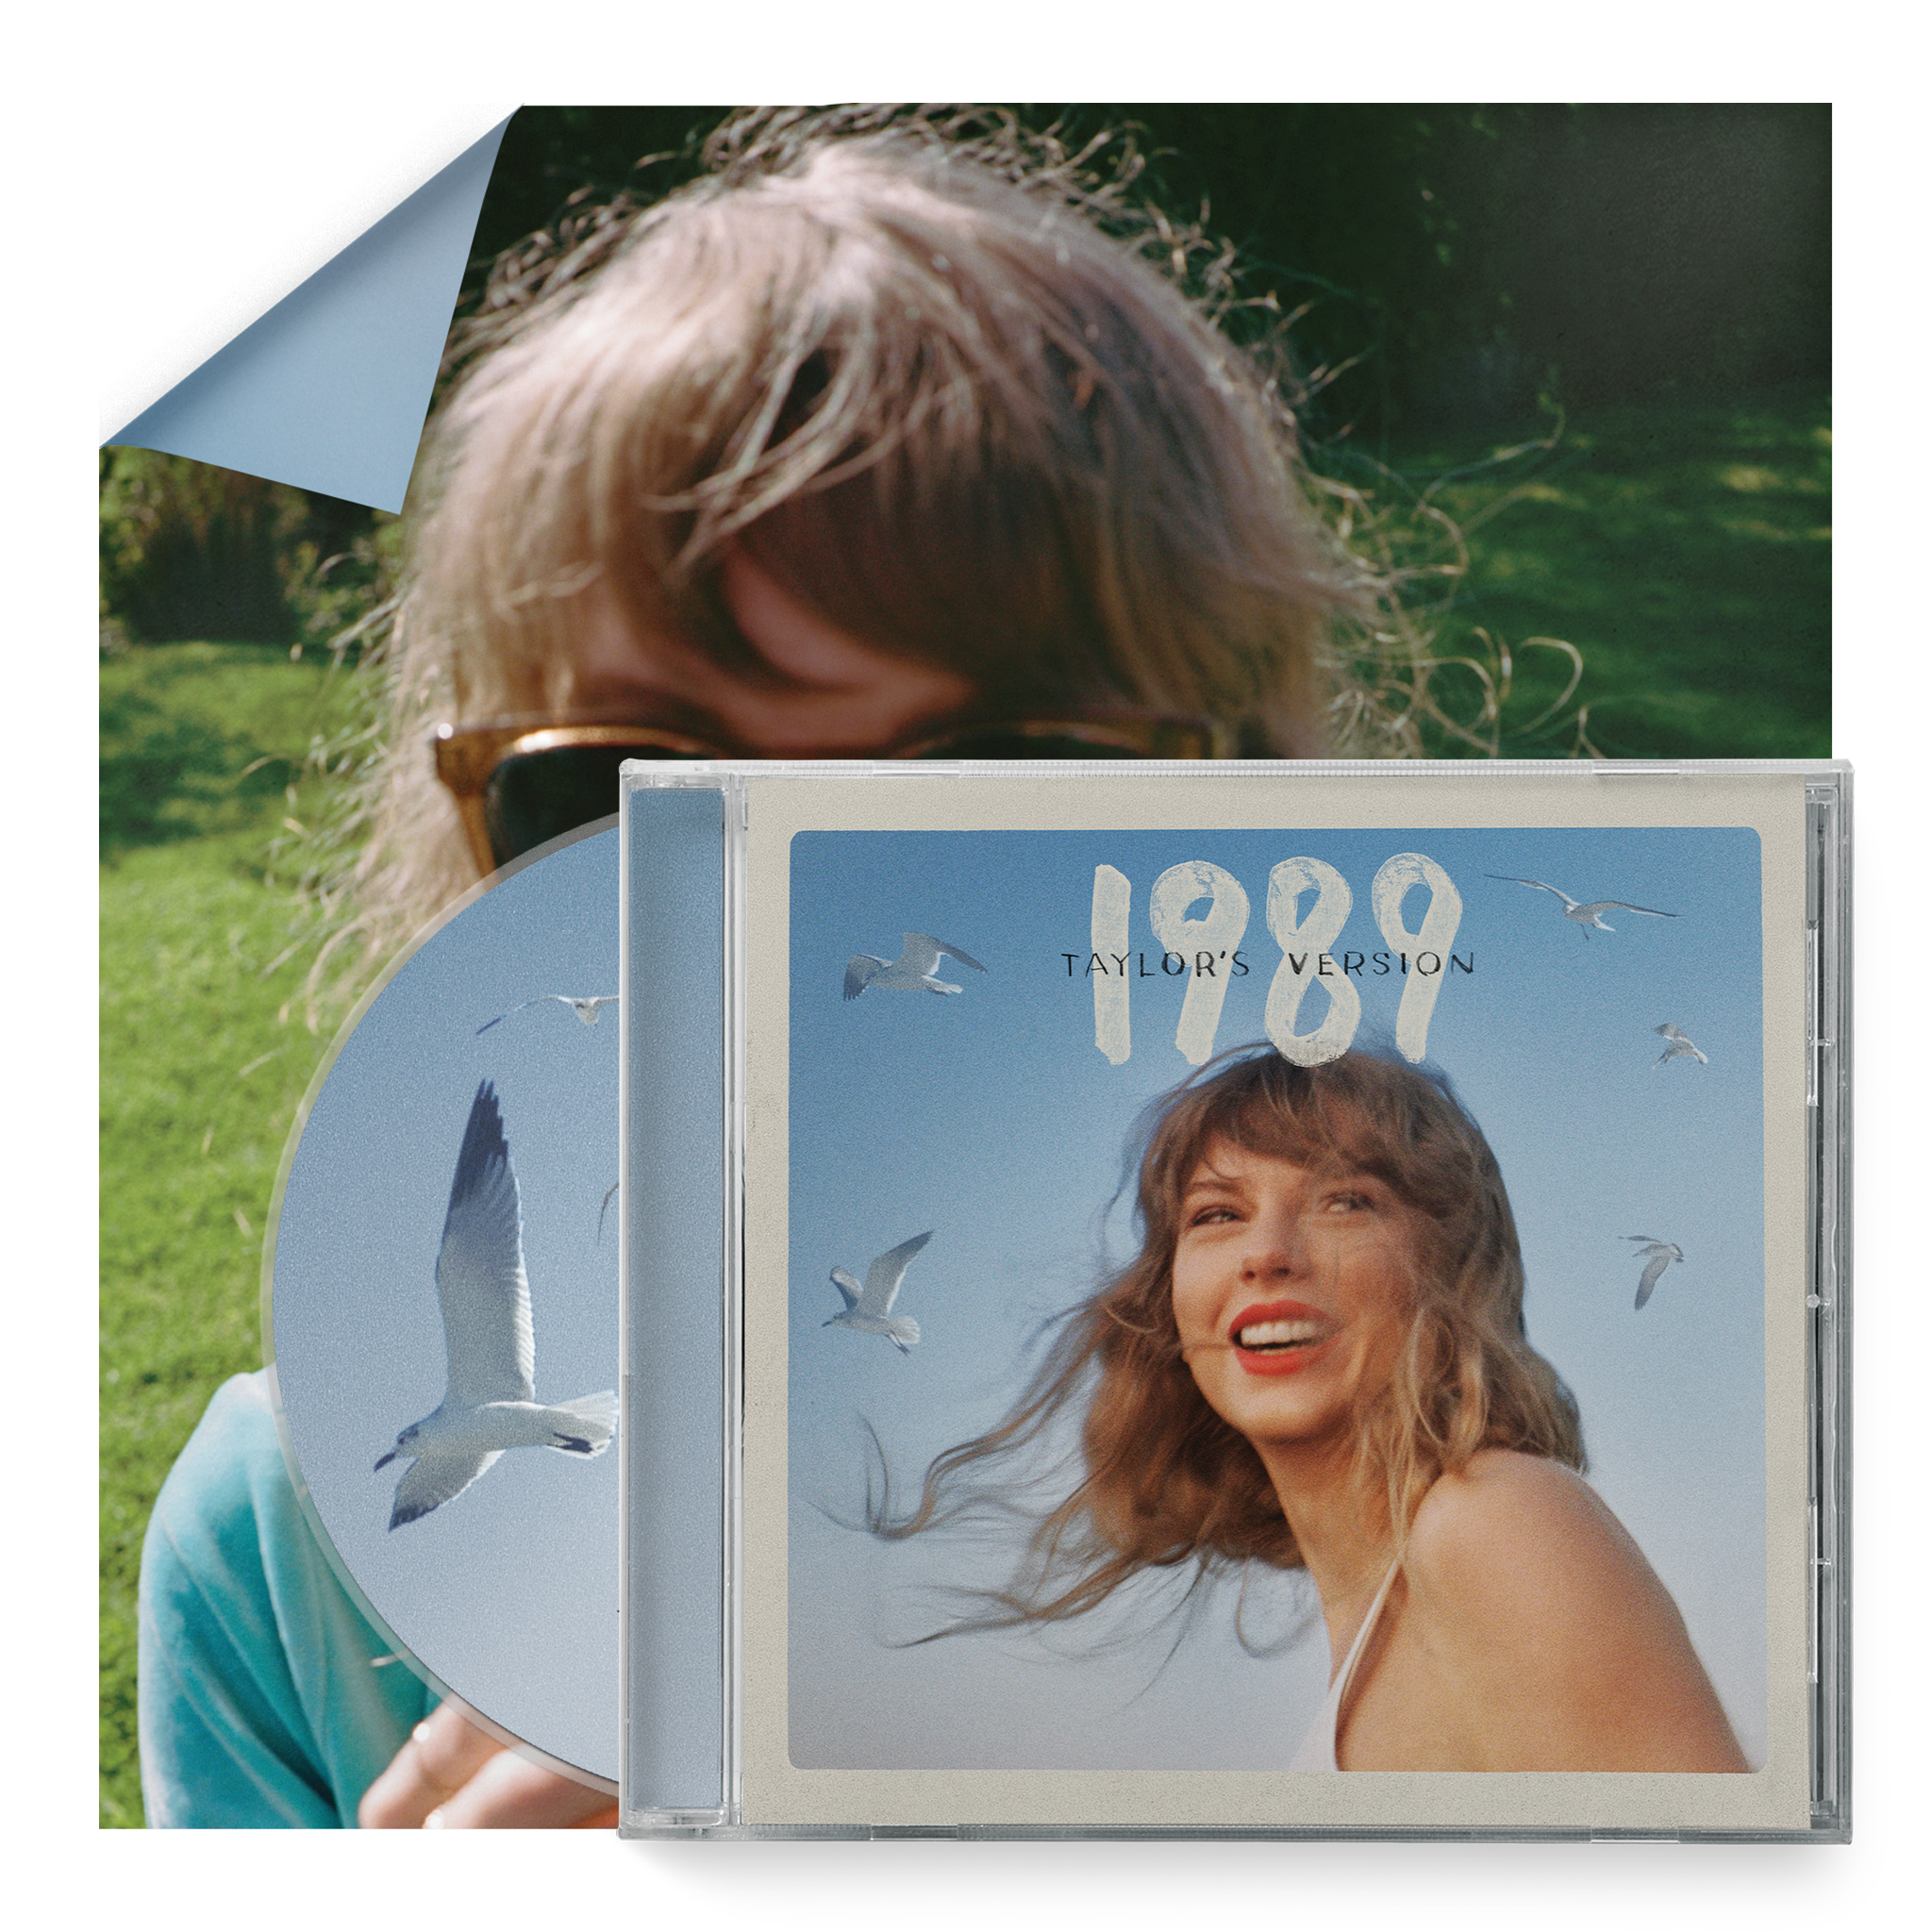 1989 (Taylor's Version) CD - Taylor Swift Official Store